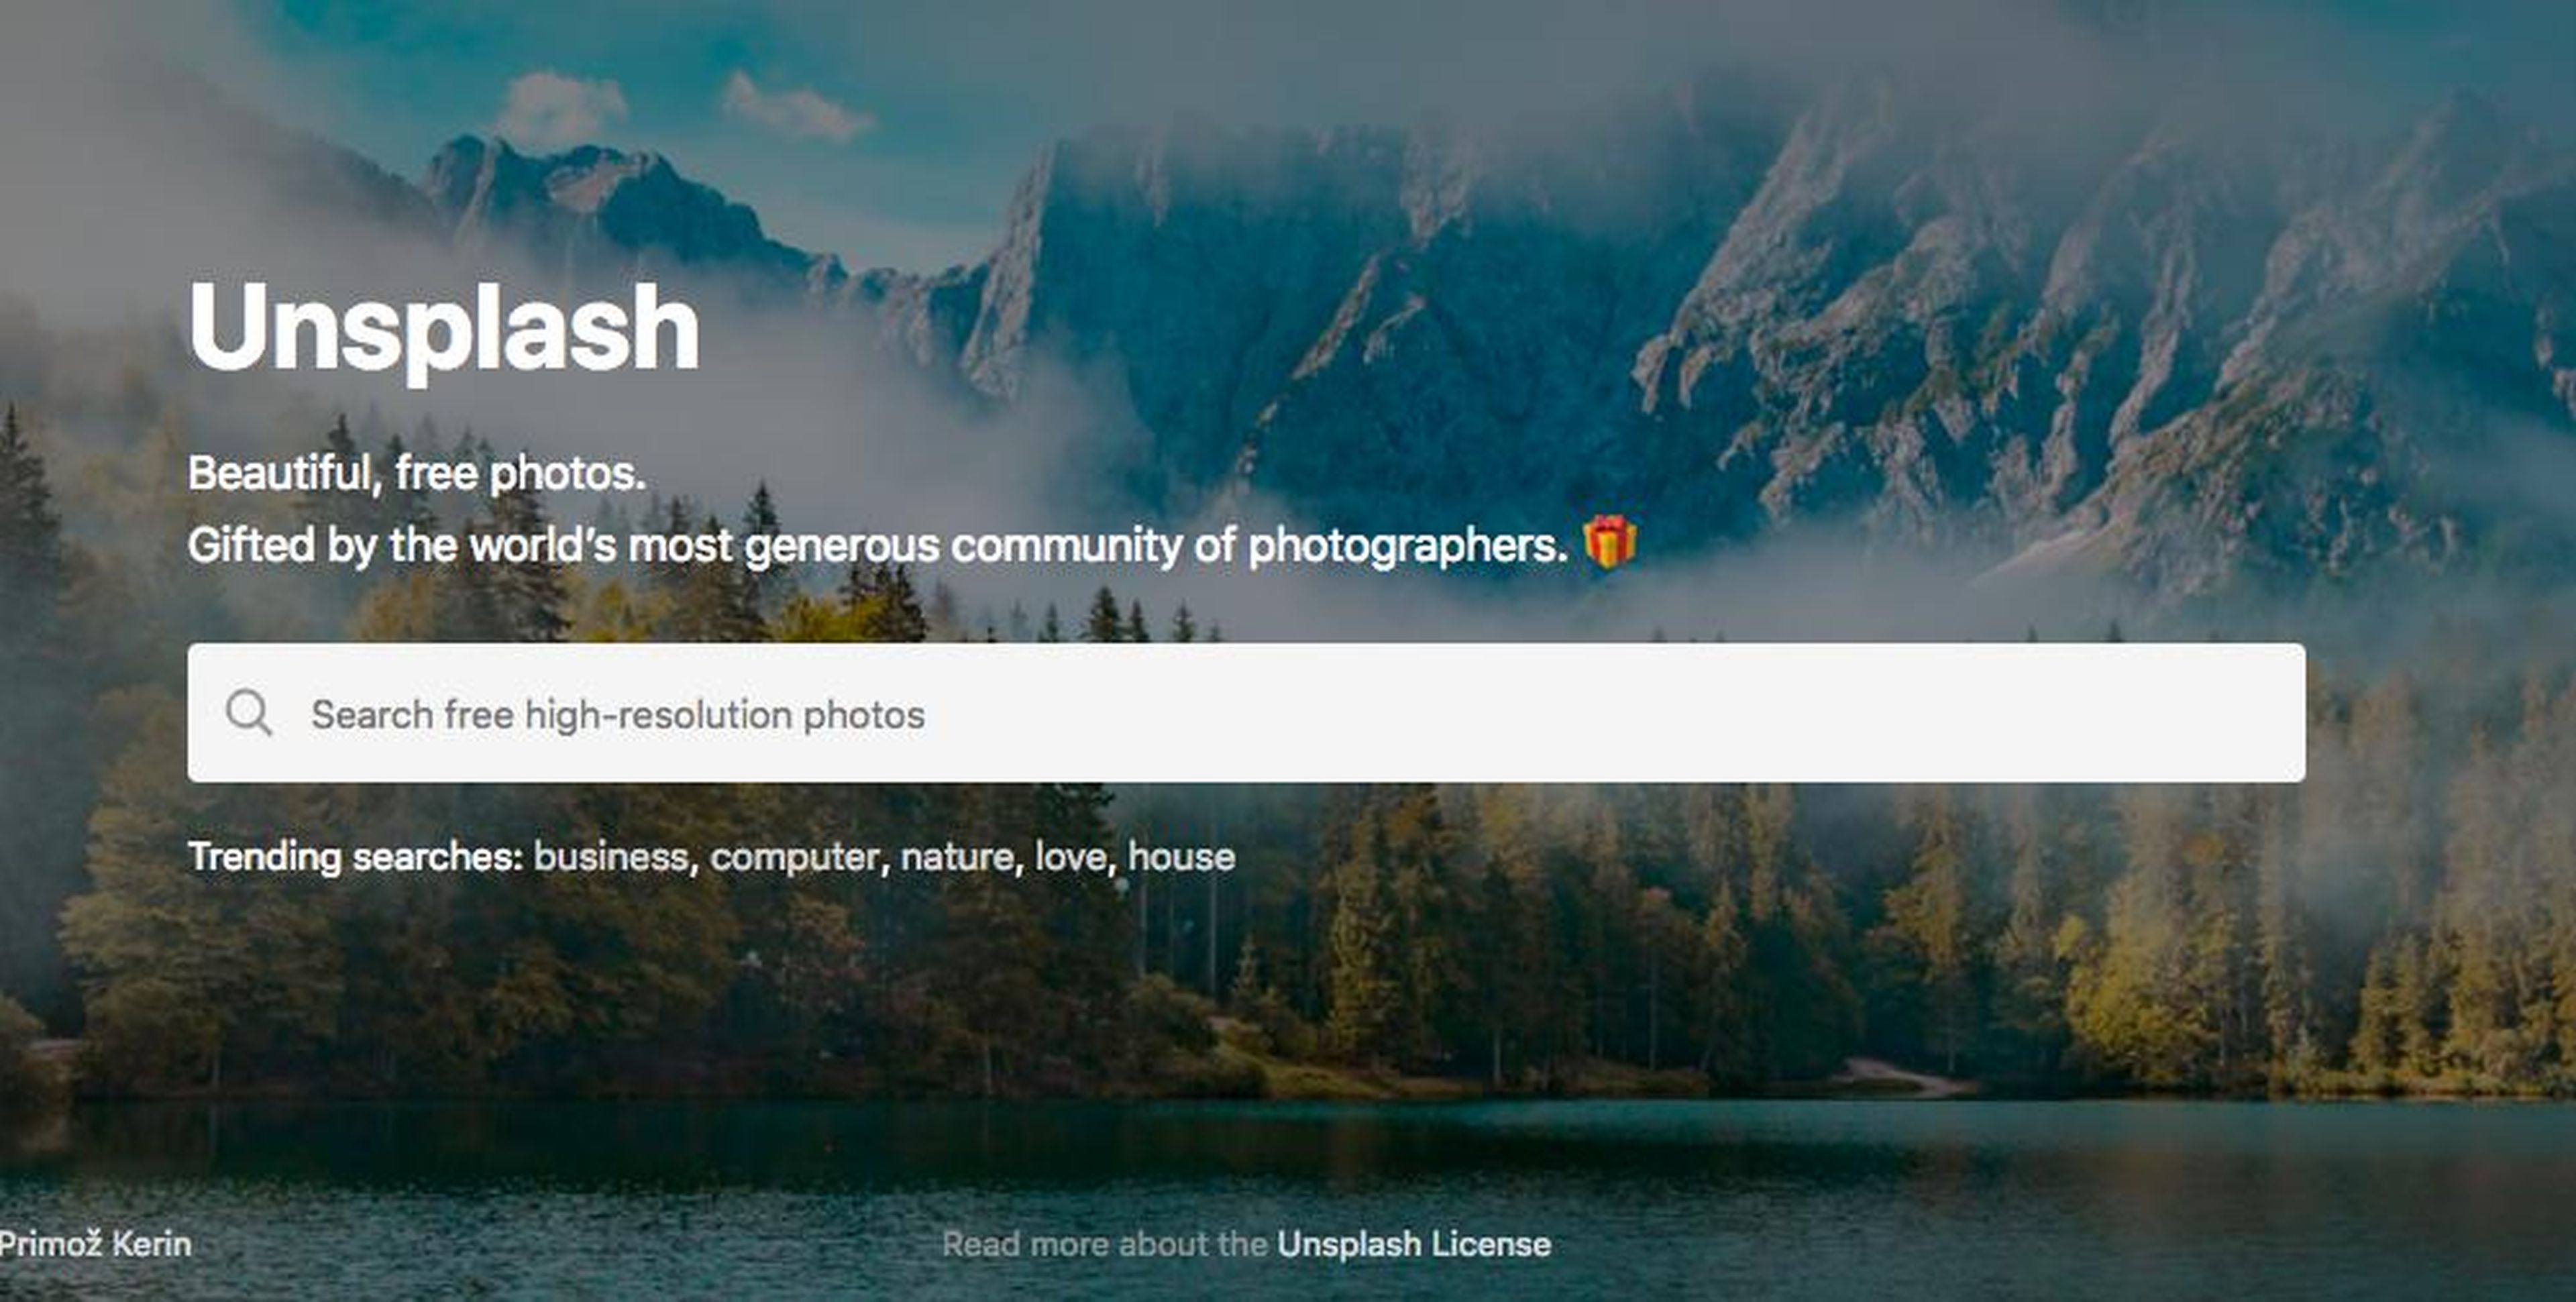 Use Unsplash over Google Images for stunning stock photography.